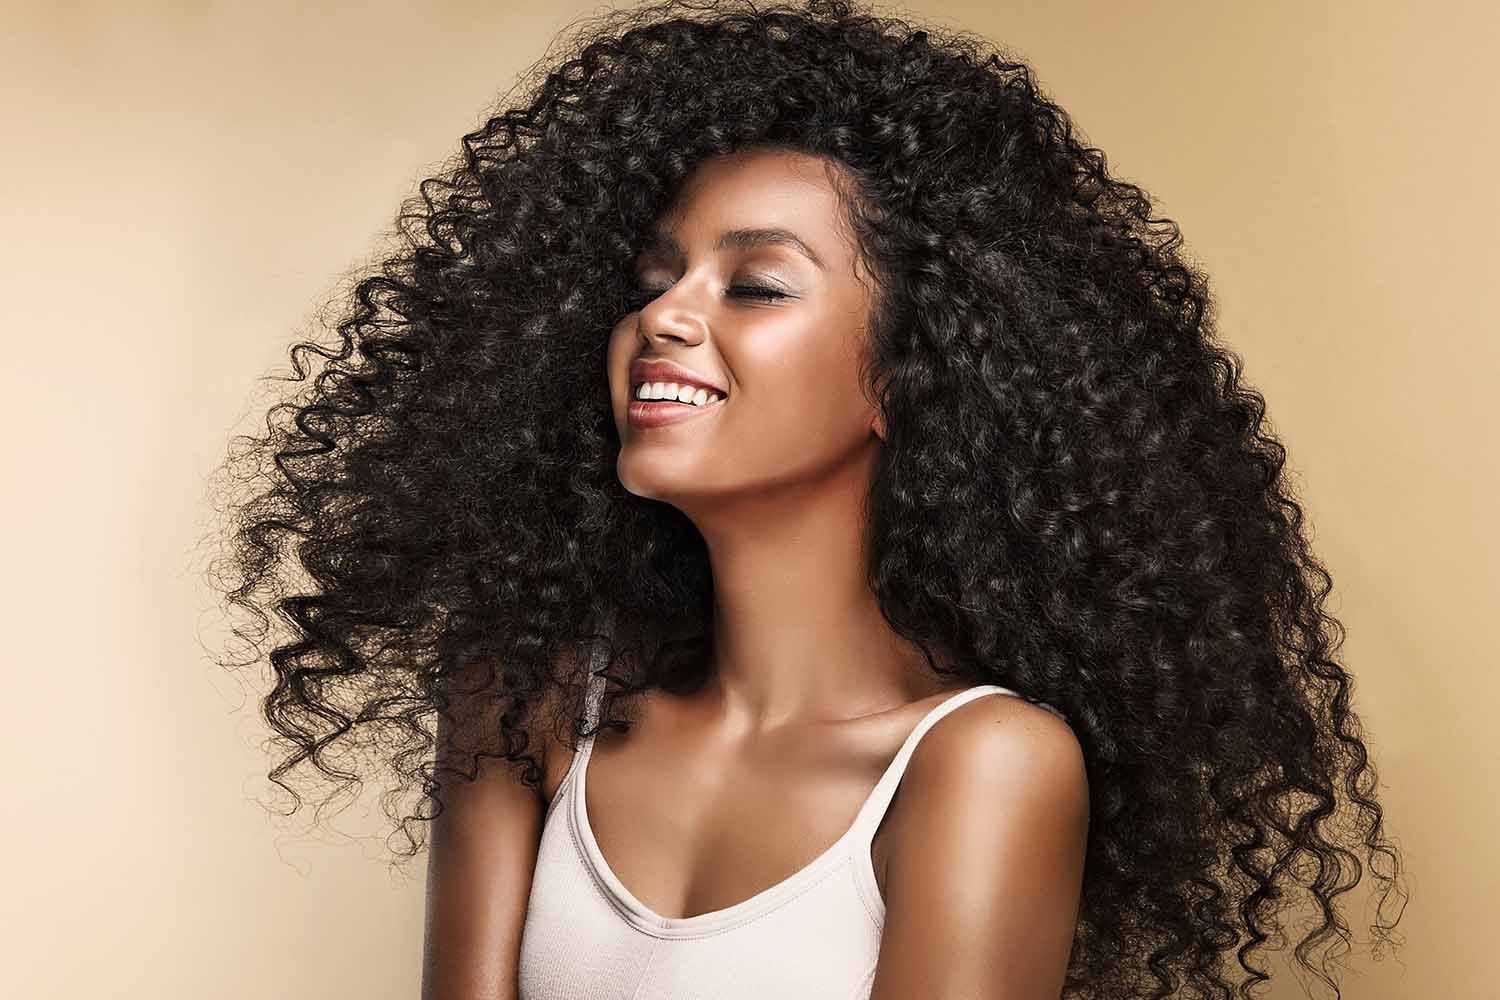 A young black woman with long, curly black hair smiles with eyes closed